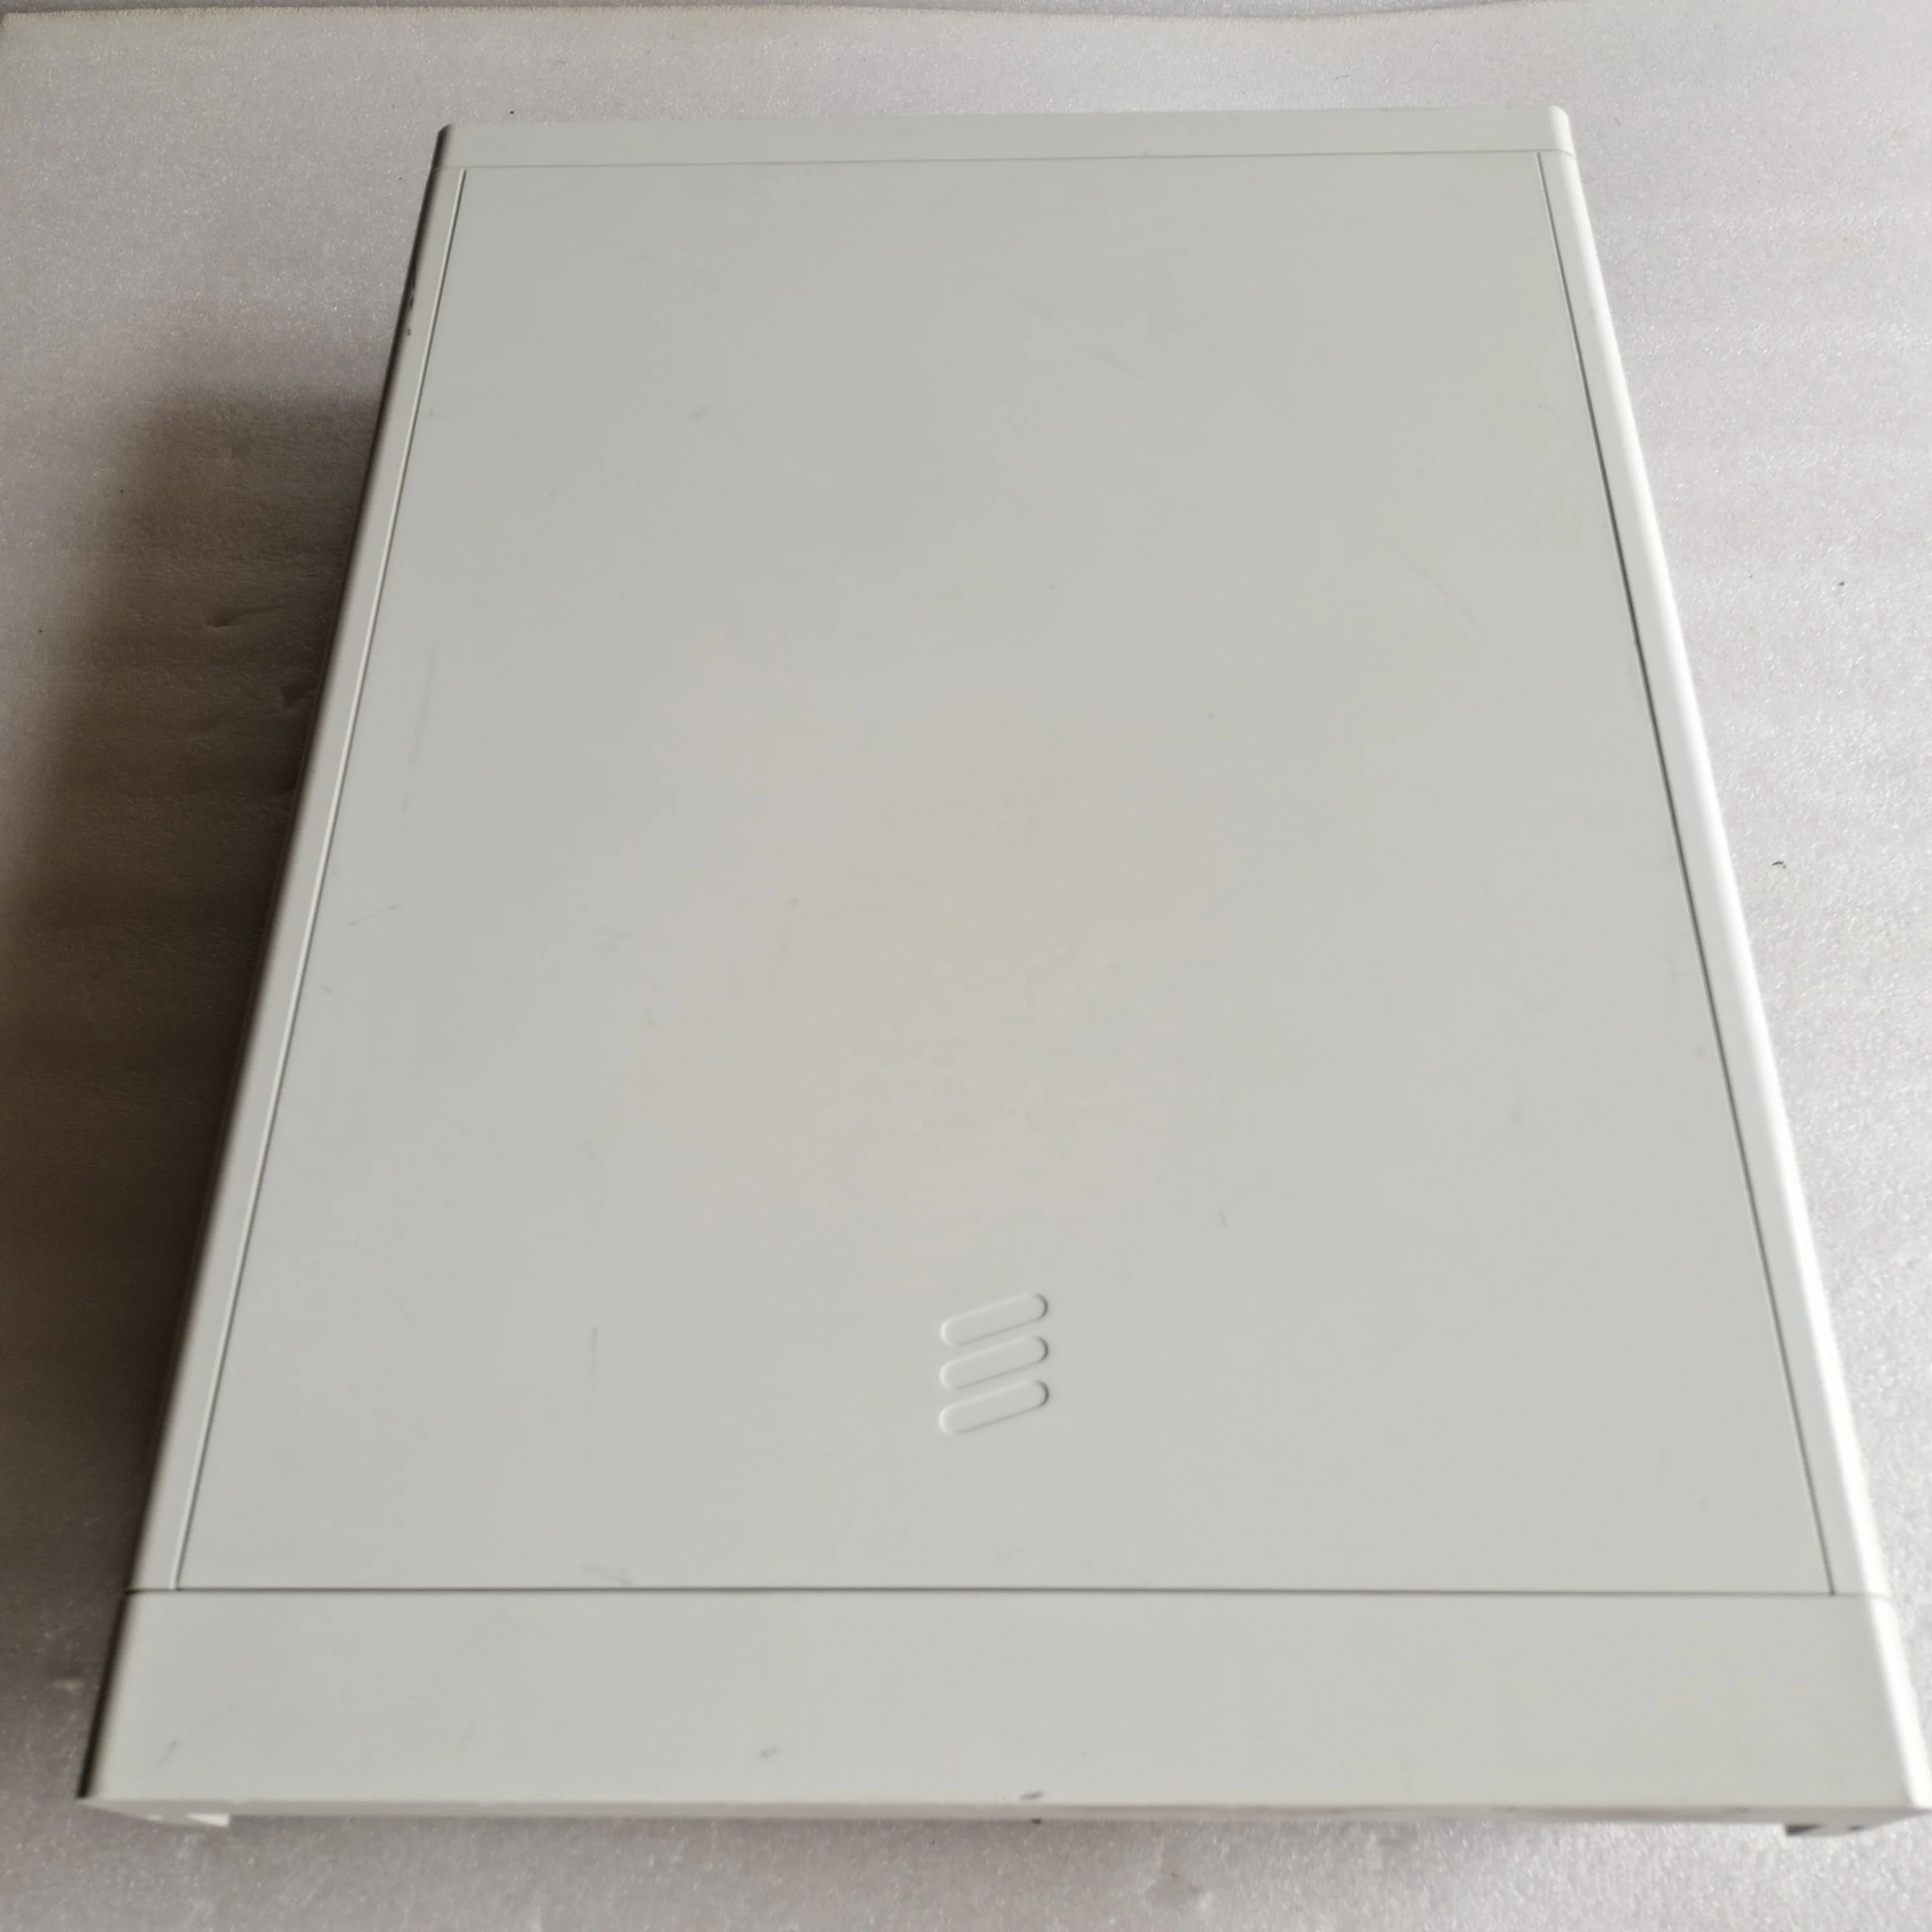 YUNPAN lte base station on sale for hotel